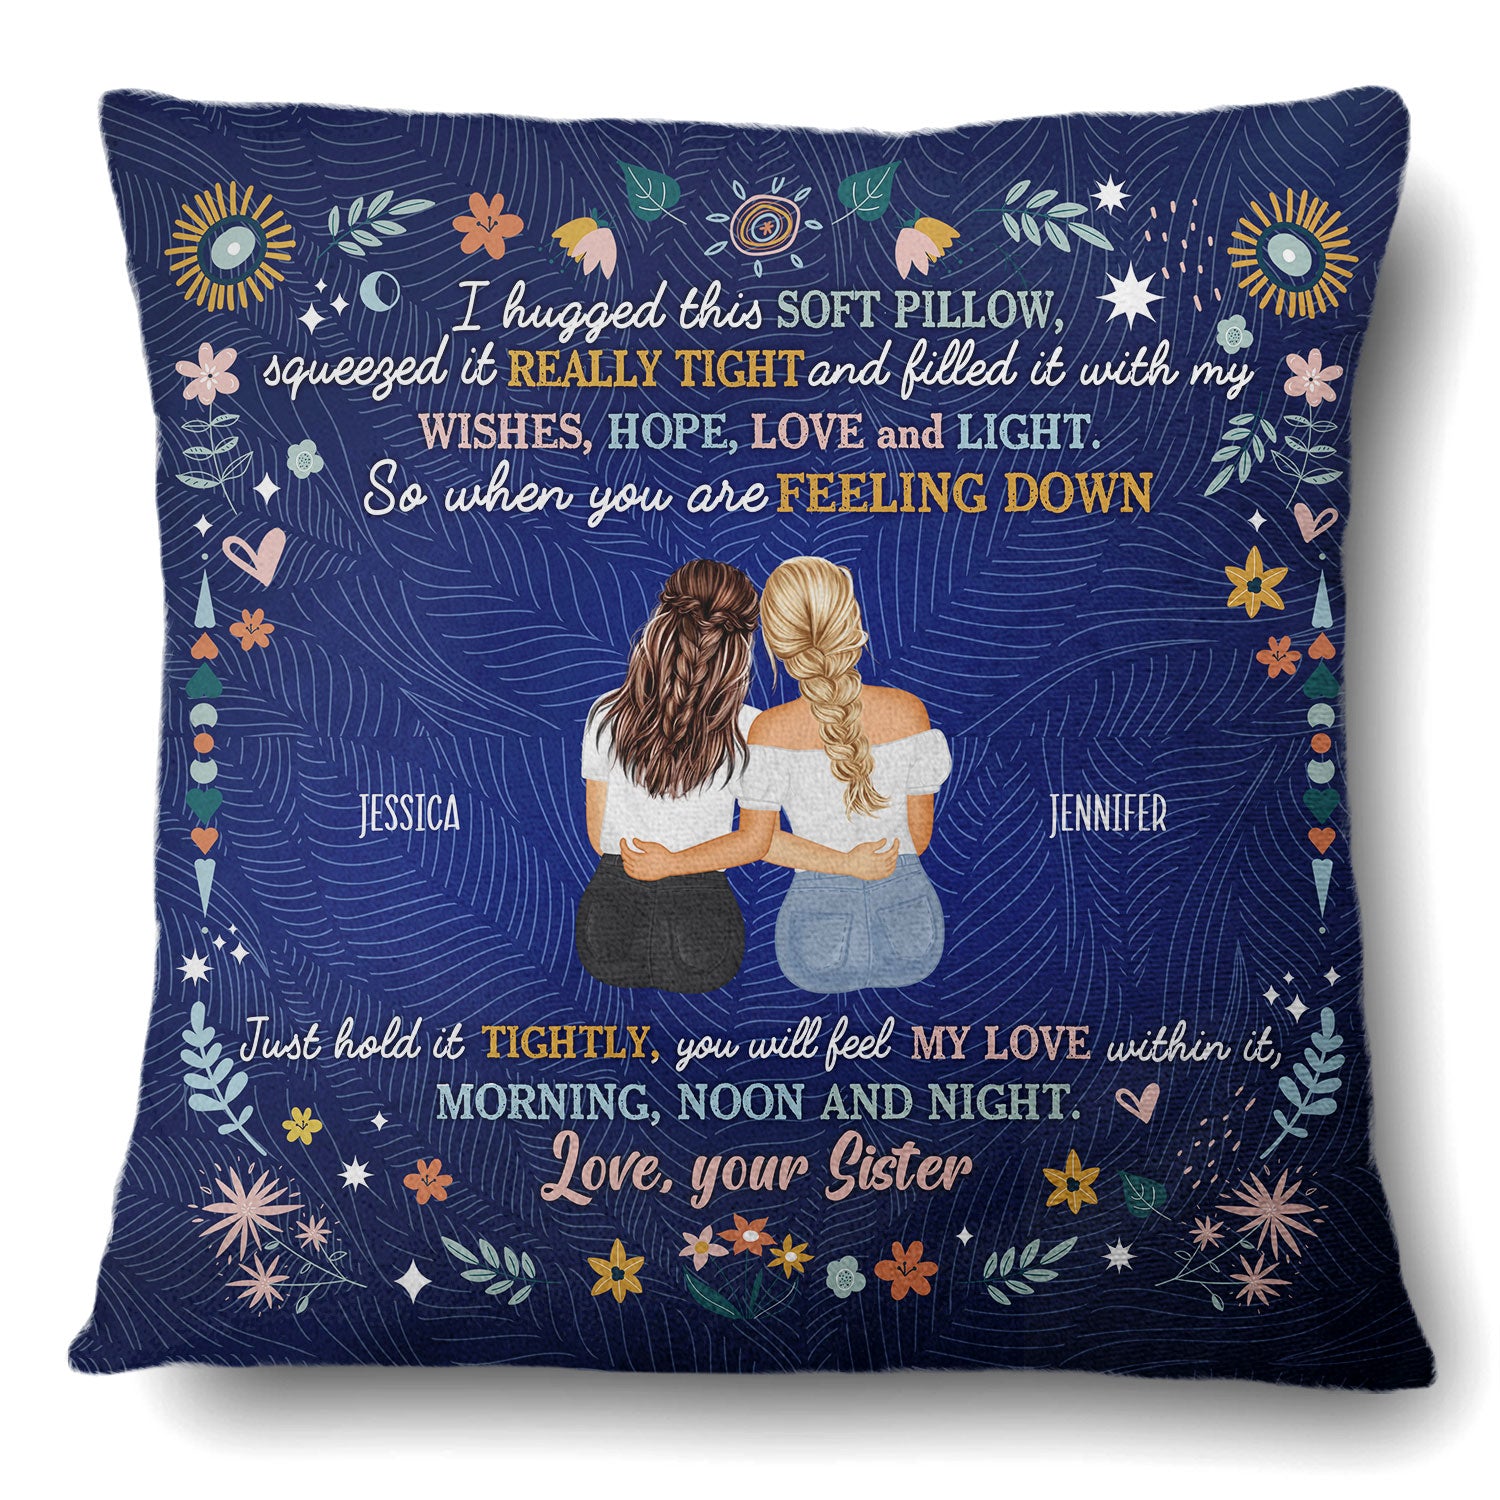 Just Hold It Tightly - Gift For Sisters And Best Friends - Personalized Pillow